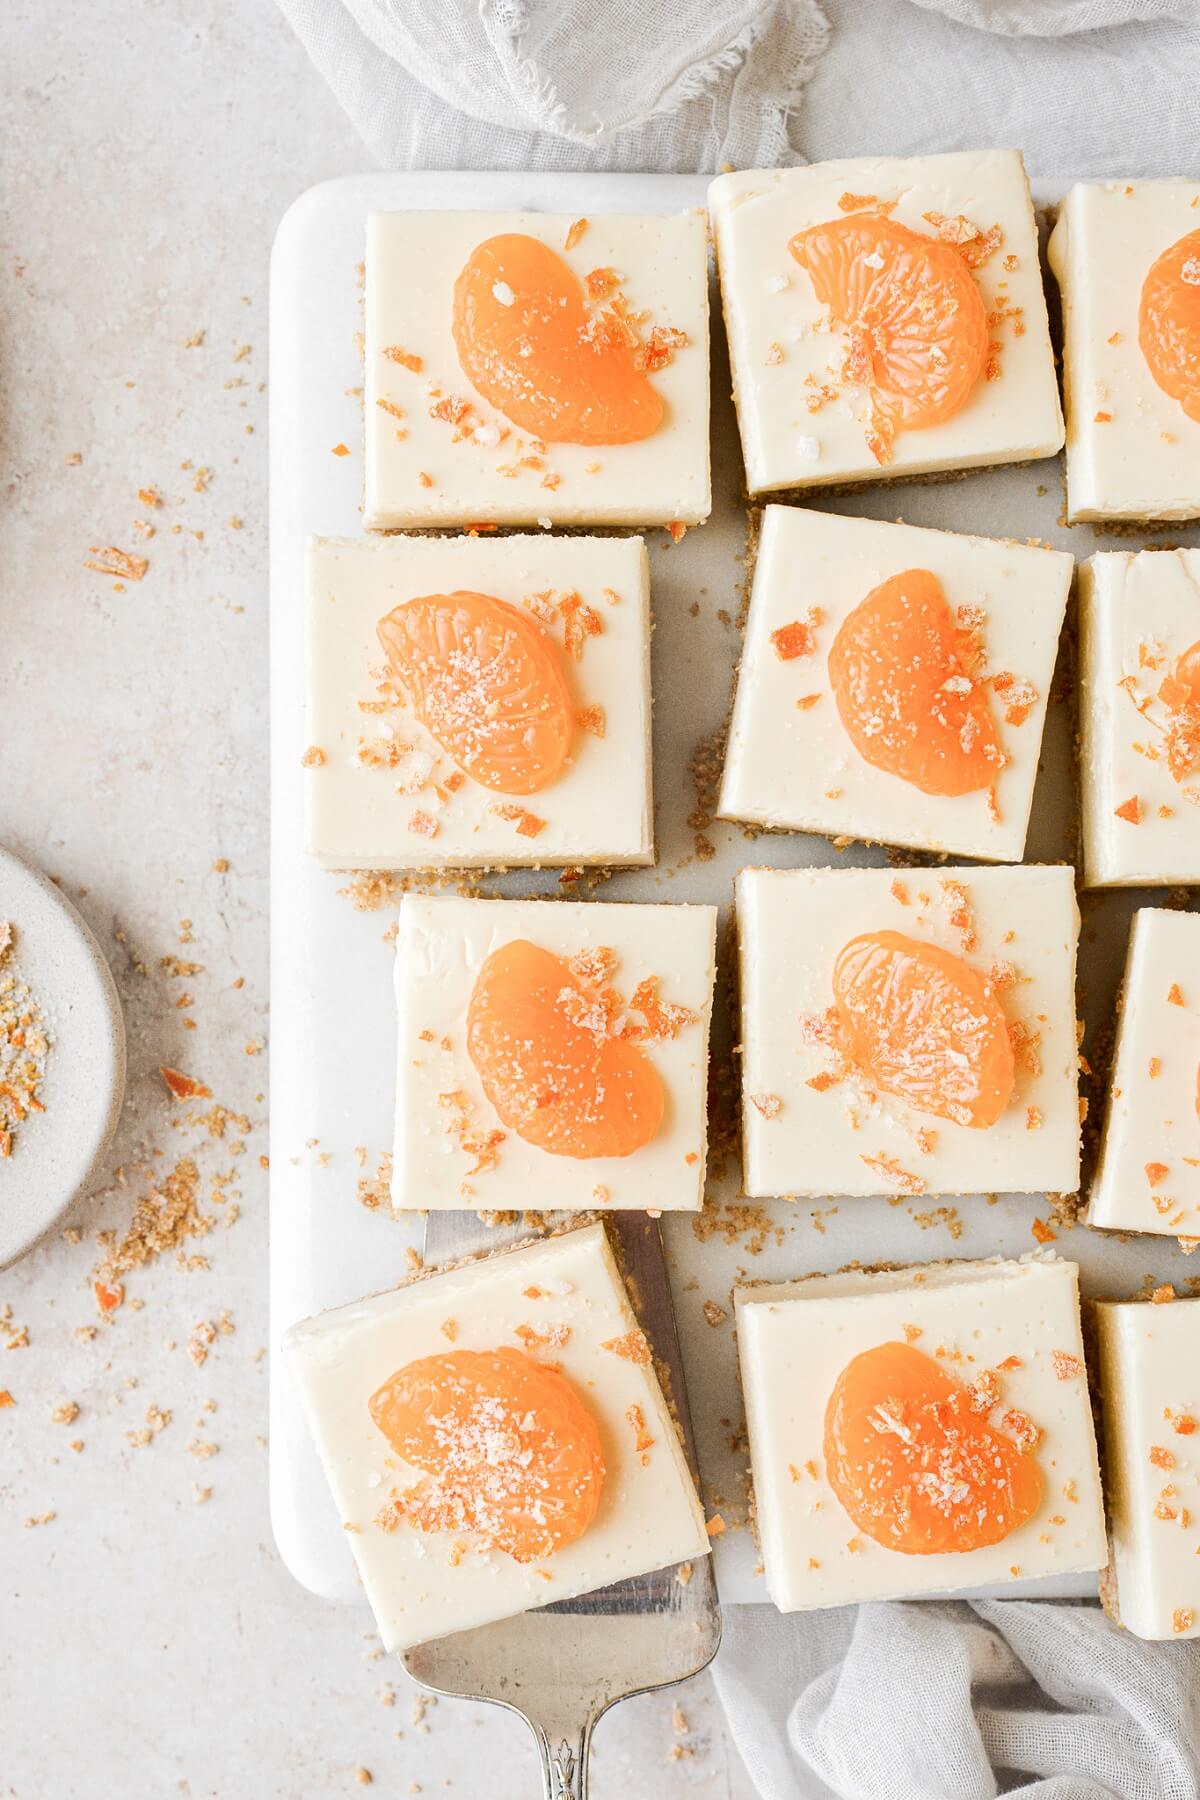 No bake orange creamsicle cheesecake bars cut into squares and topped with mandarin orange slices.